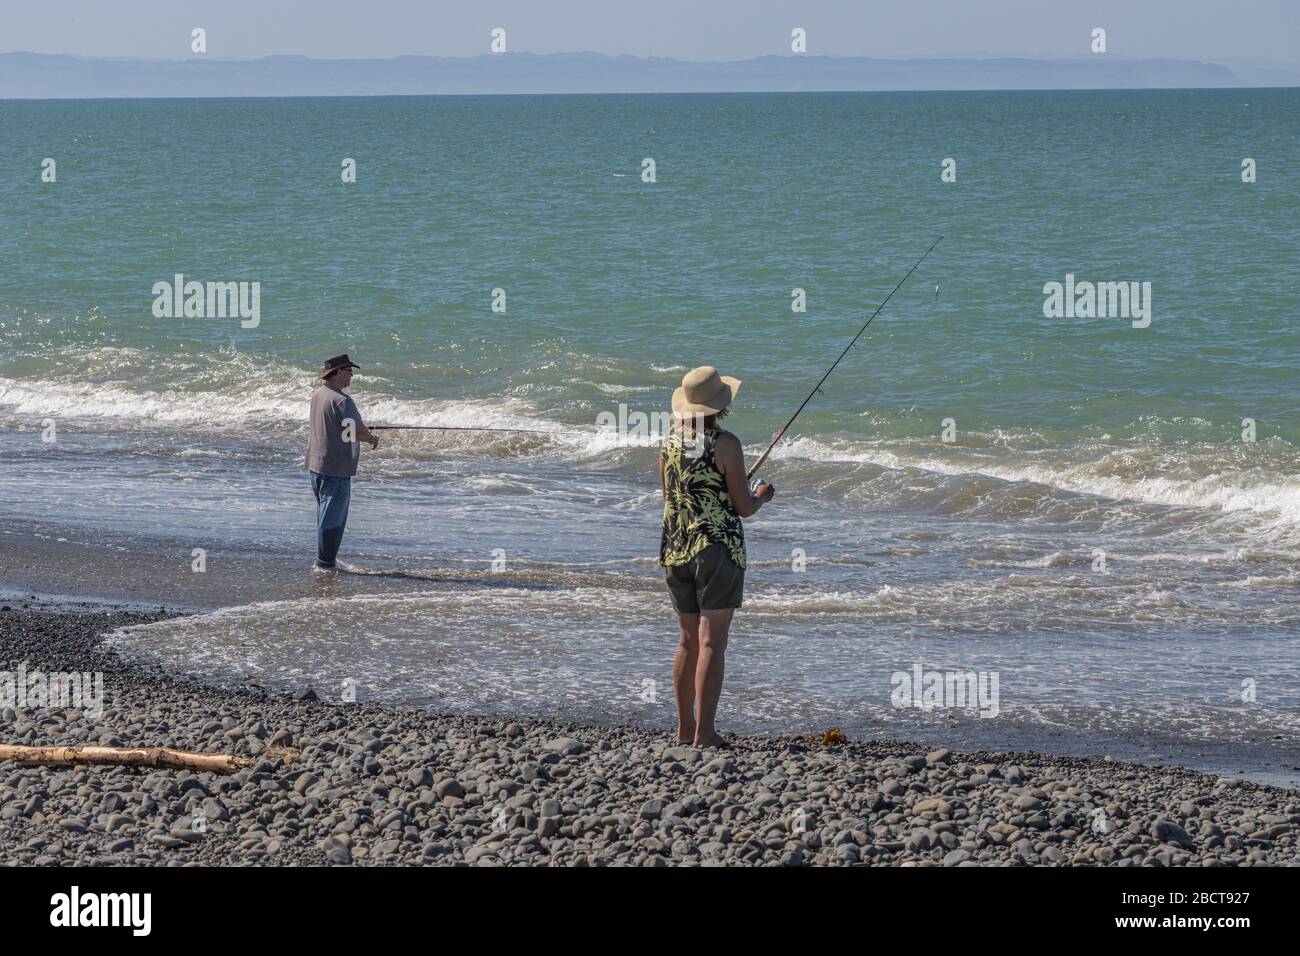 Man and woman fishing on edge of sea in Hawkes Bay, New Zealand Stock Photo